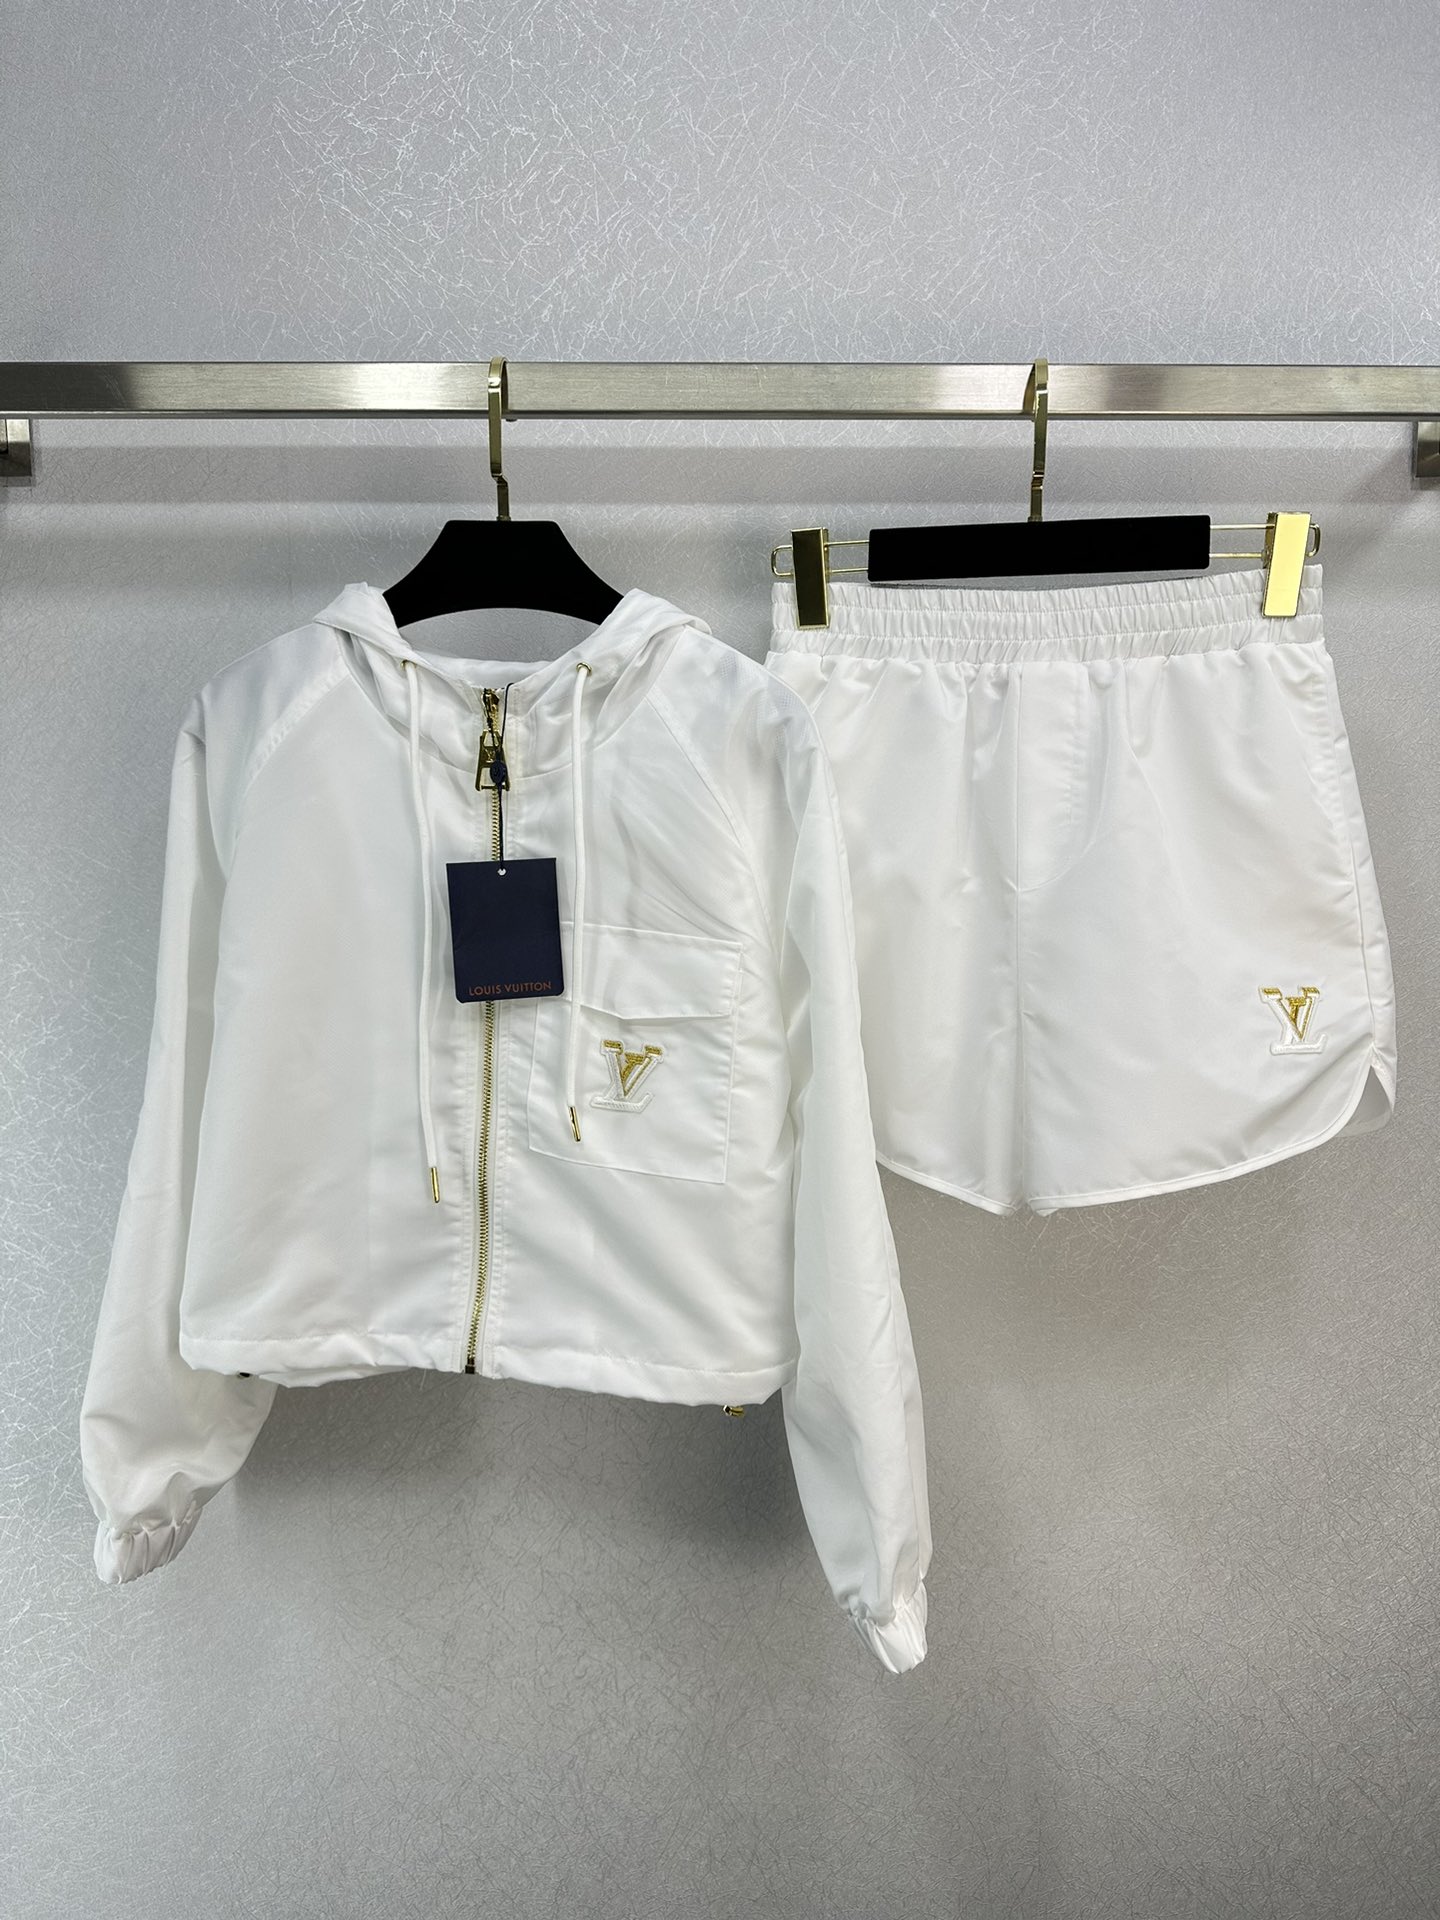 Louis Vuitton Clothing Coats & Jackets Shorts Two Piece Outfits & Matching Sets Summer Collection Hooded Top